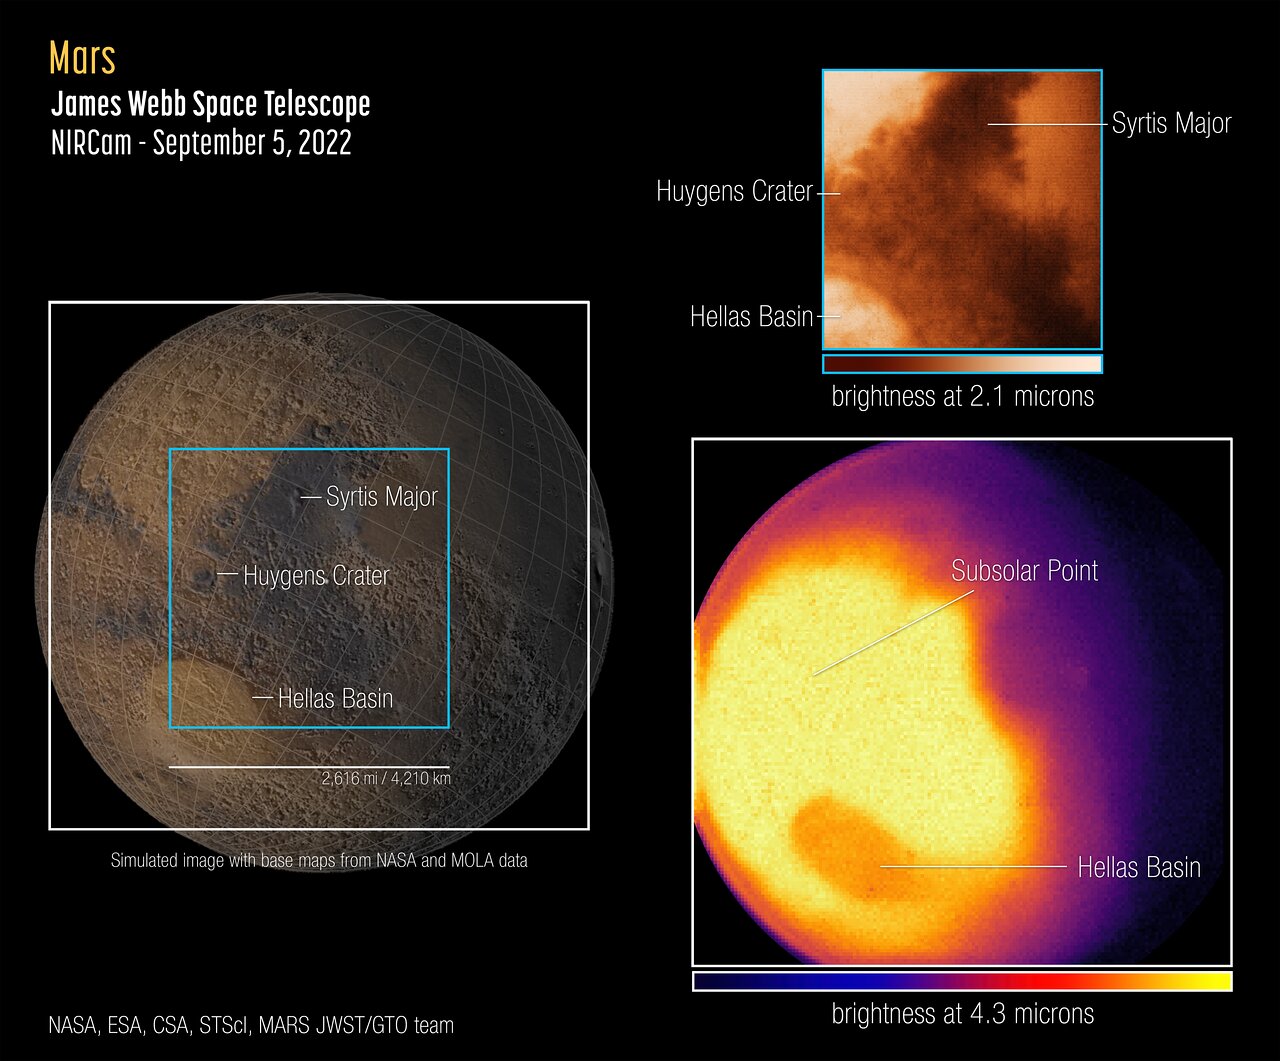 On the left is a simulated map of Mars, and on the right is JWST's image of thermal emission from the surface of the planet.